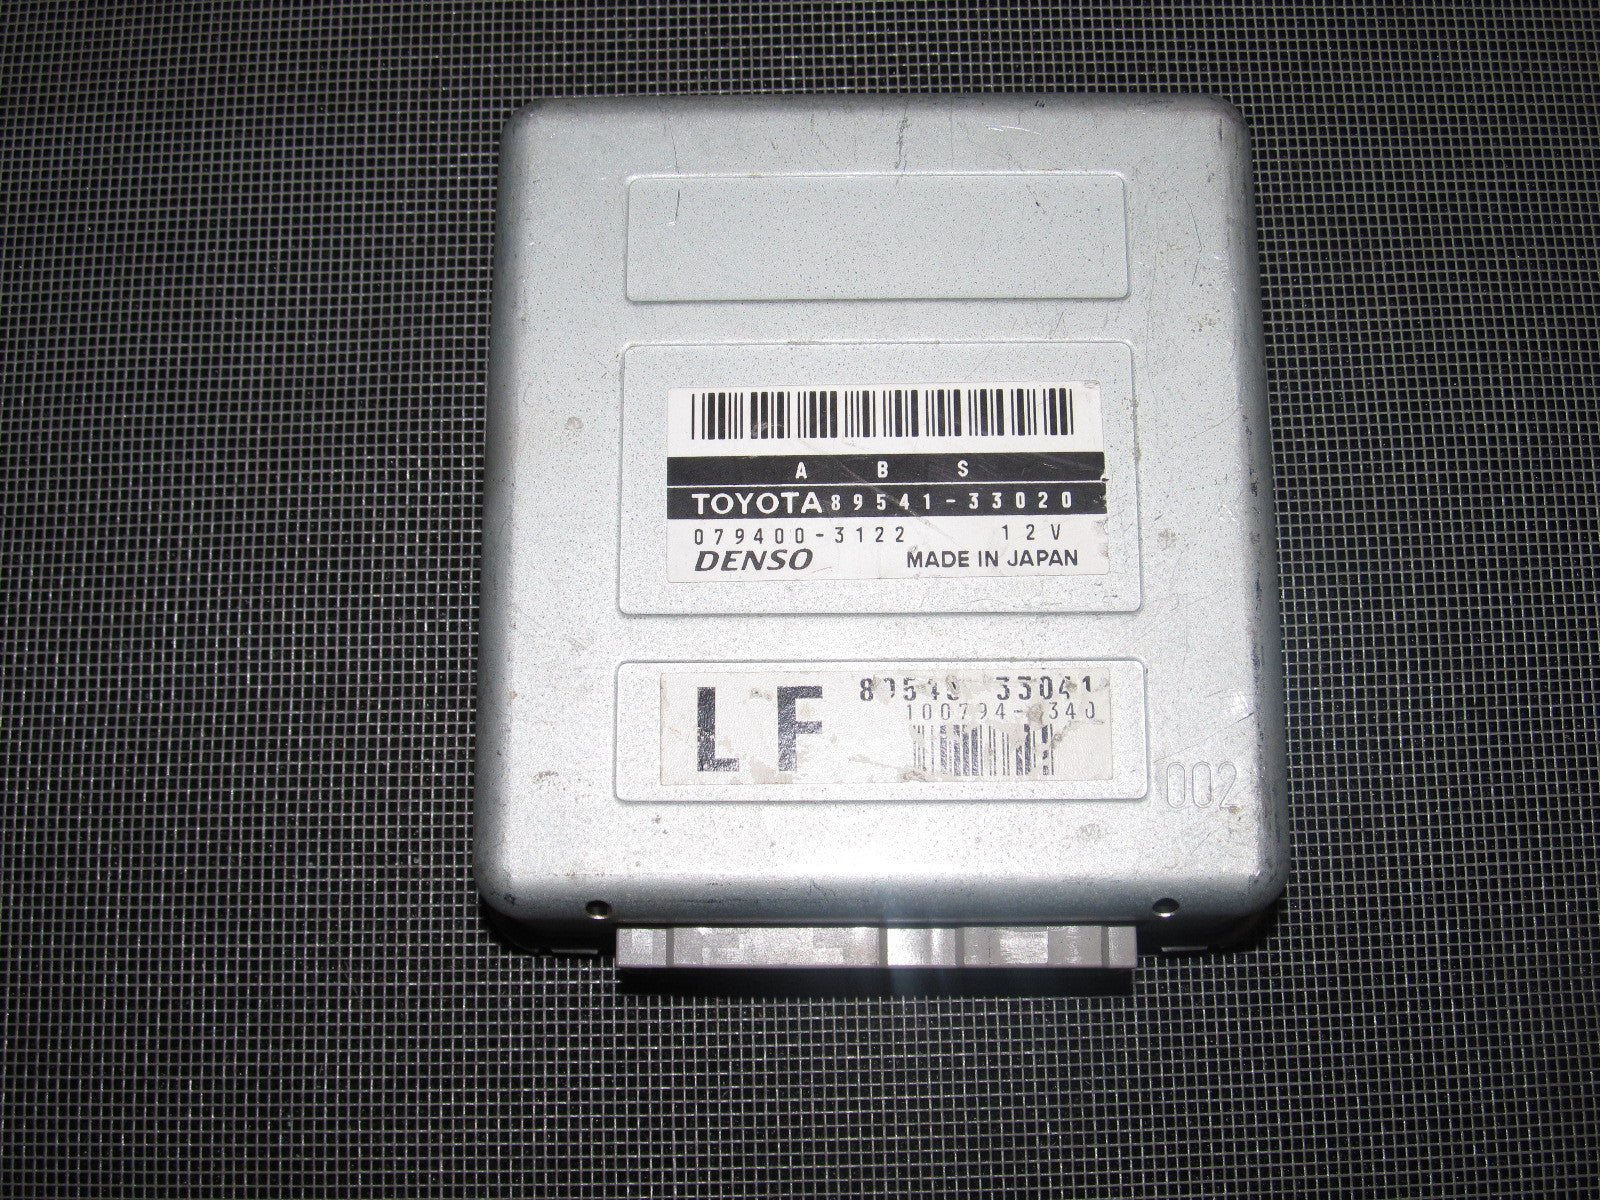 92 93 94 95 96 Toyota Camry ABS Computer 89541-33020